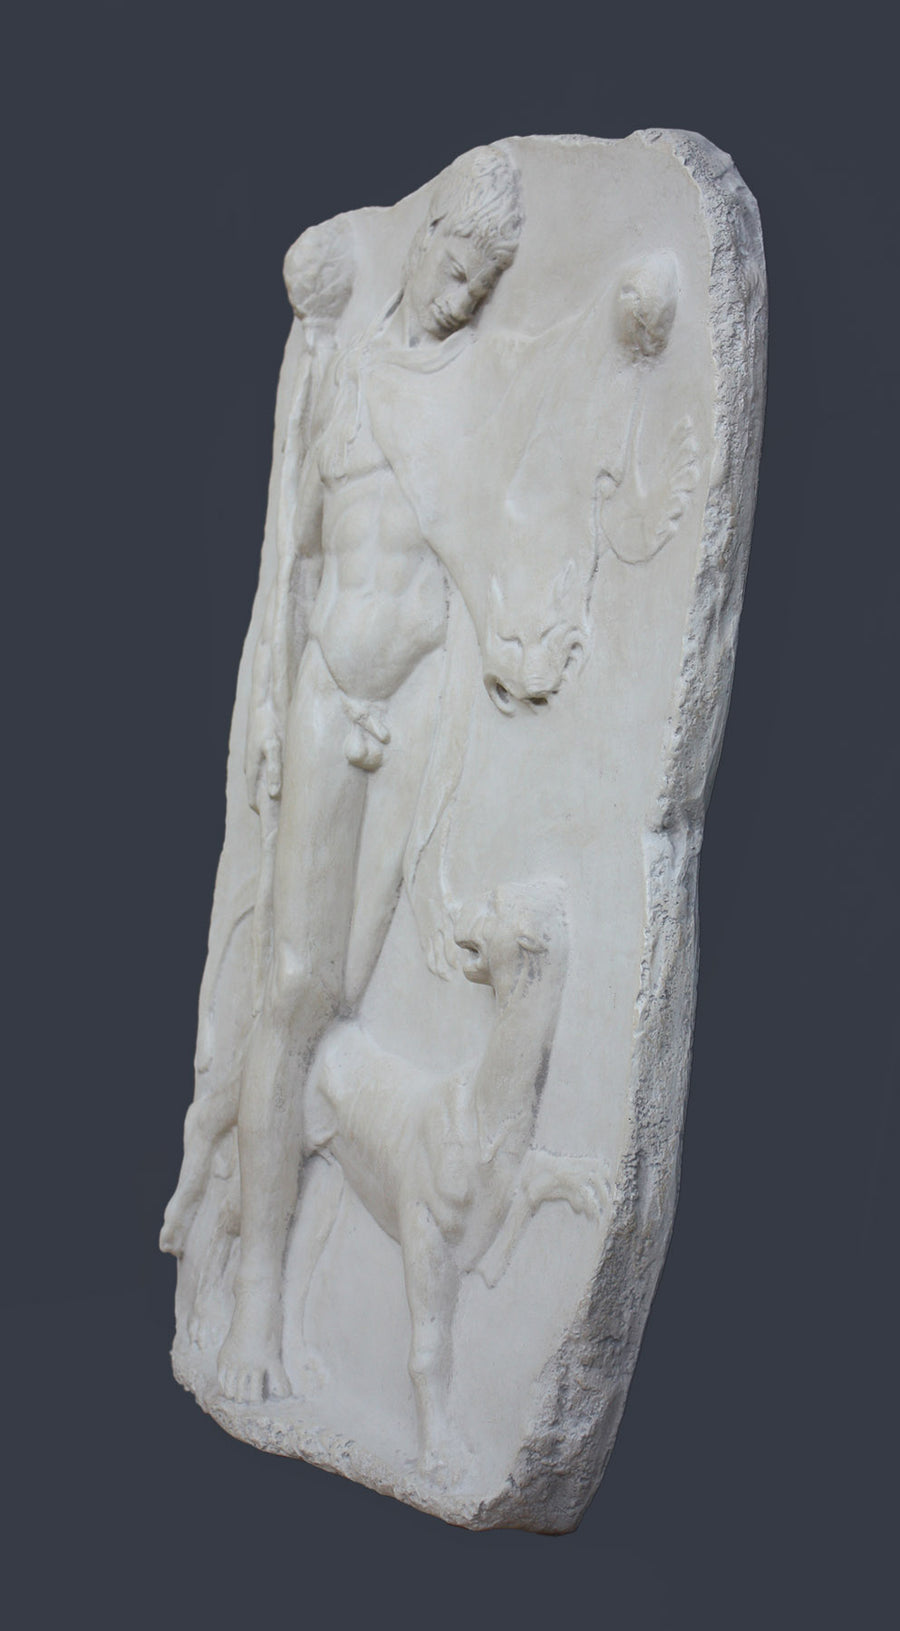 side photo of white plaster cast relief sculpture of satyr with animal skin over his arm and staff in one hand walking beside a panther against gray background